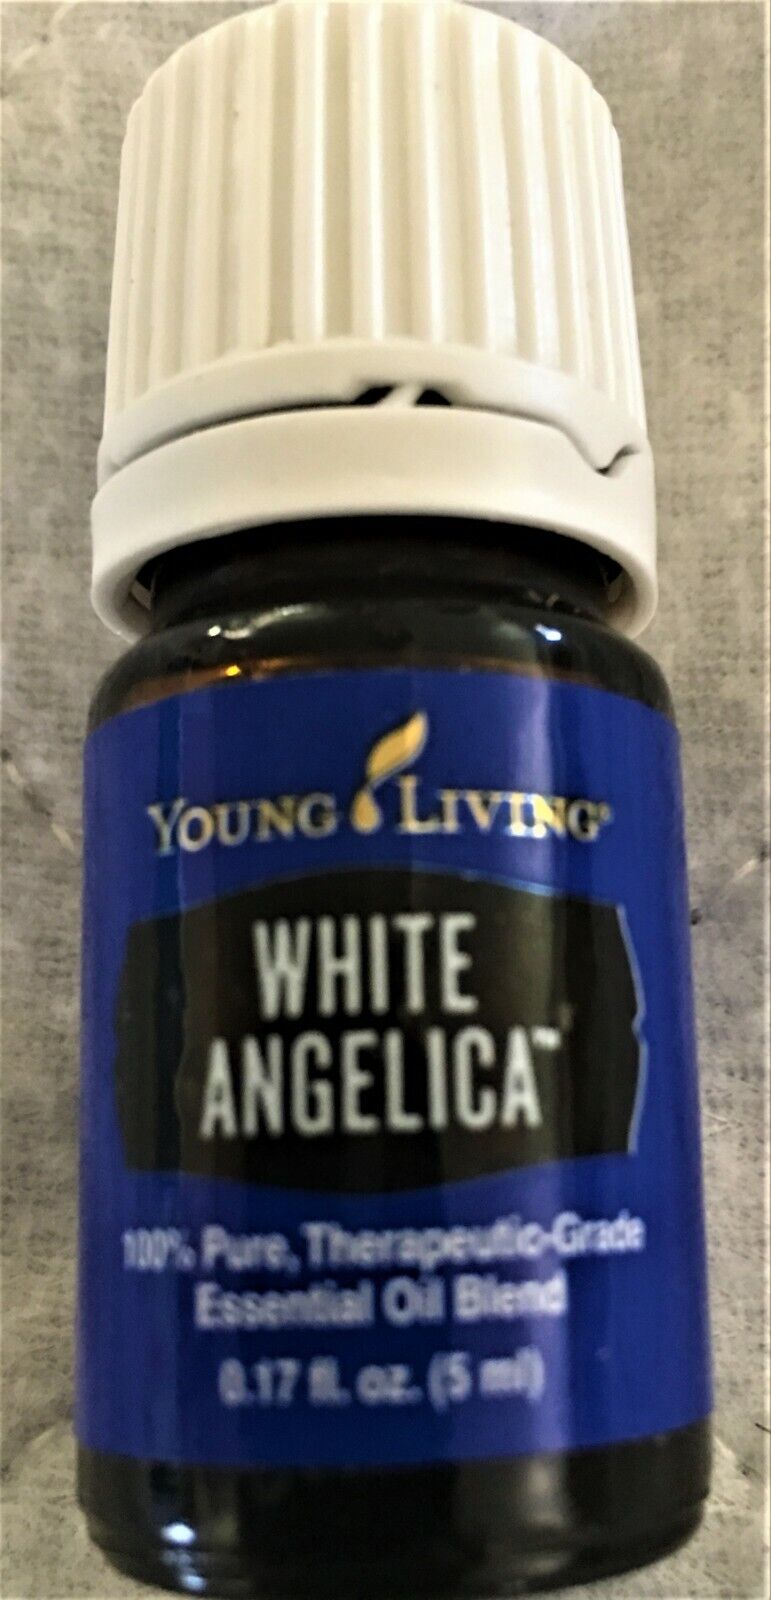 *** Young Living WHITE ANGELICA 5ml oil *** DISCOUNT INSIDE FREE SHIPPING